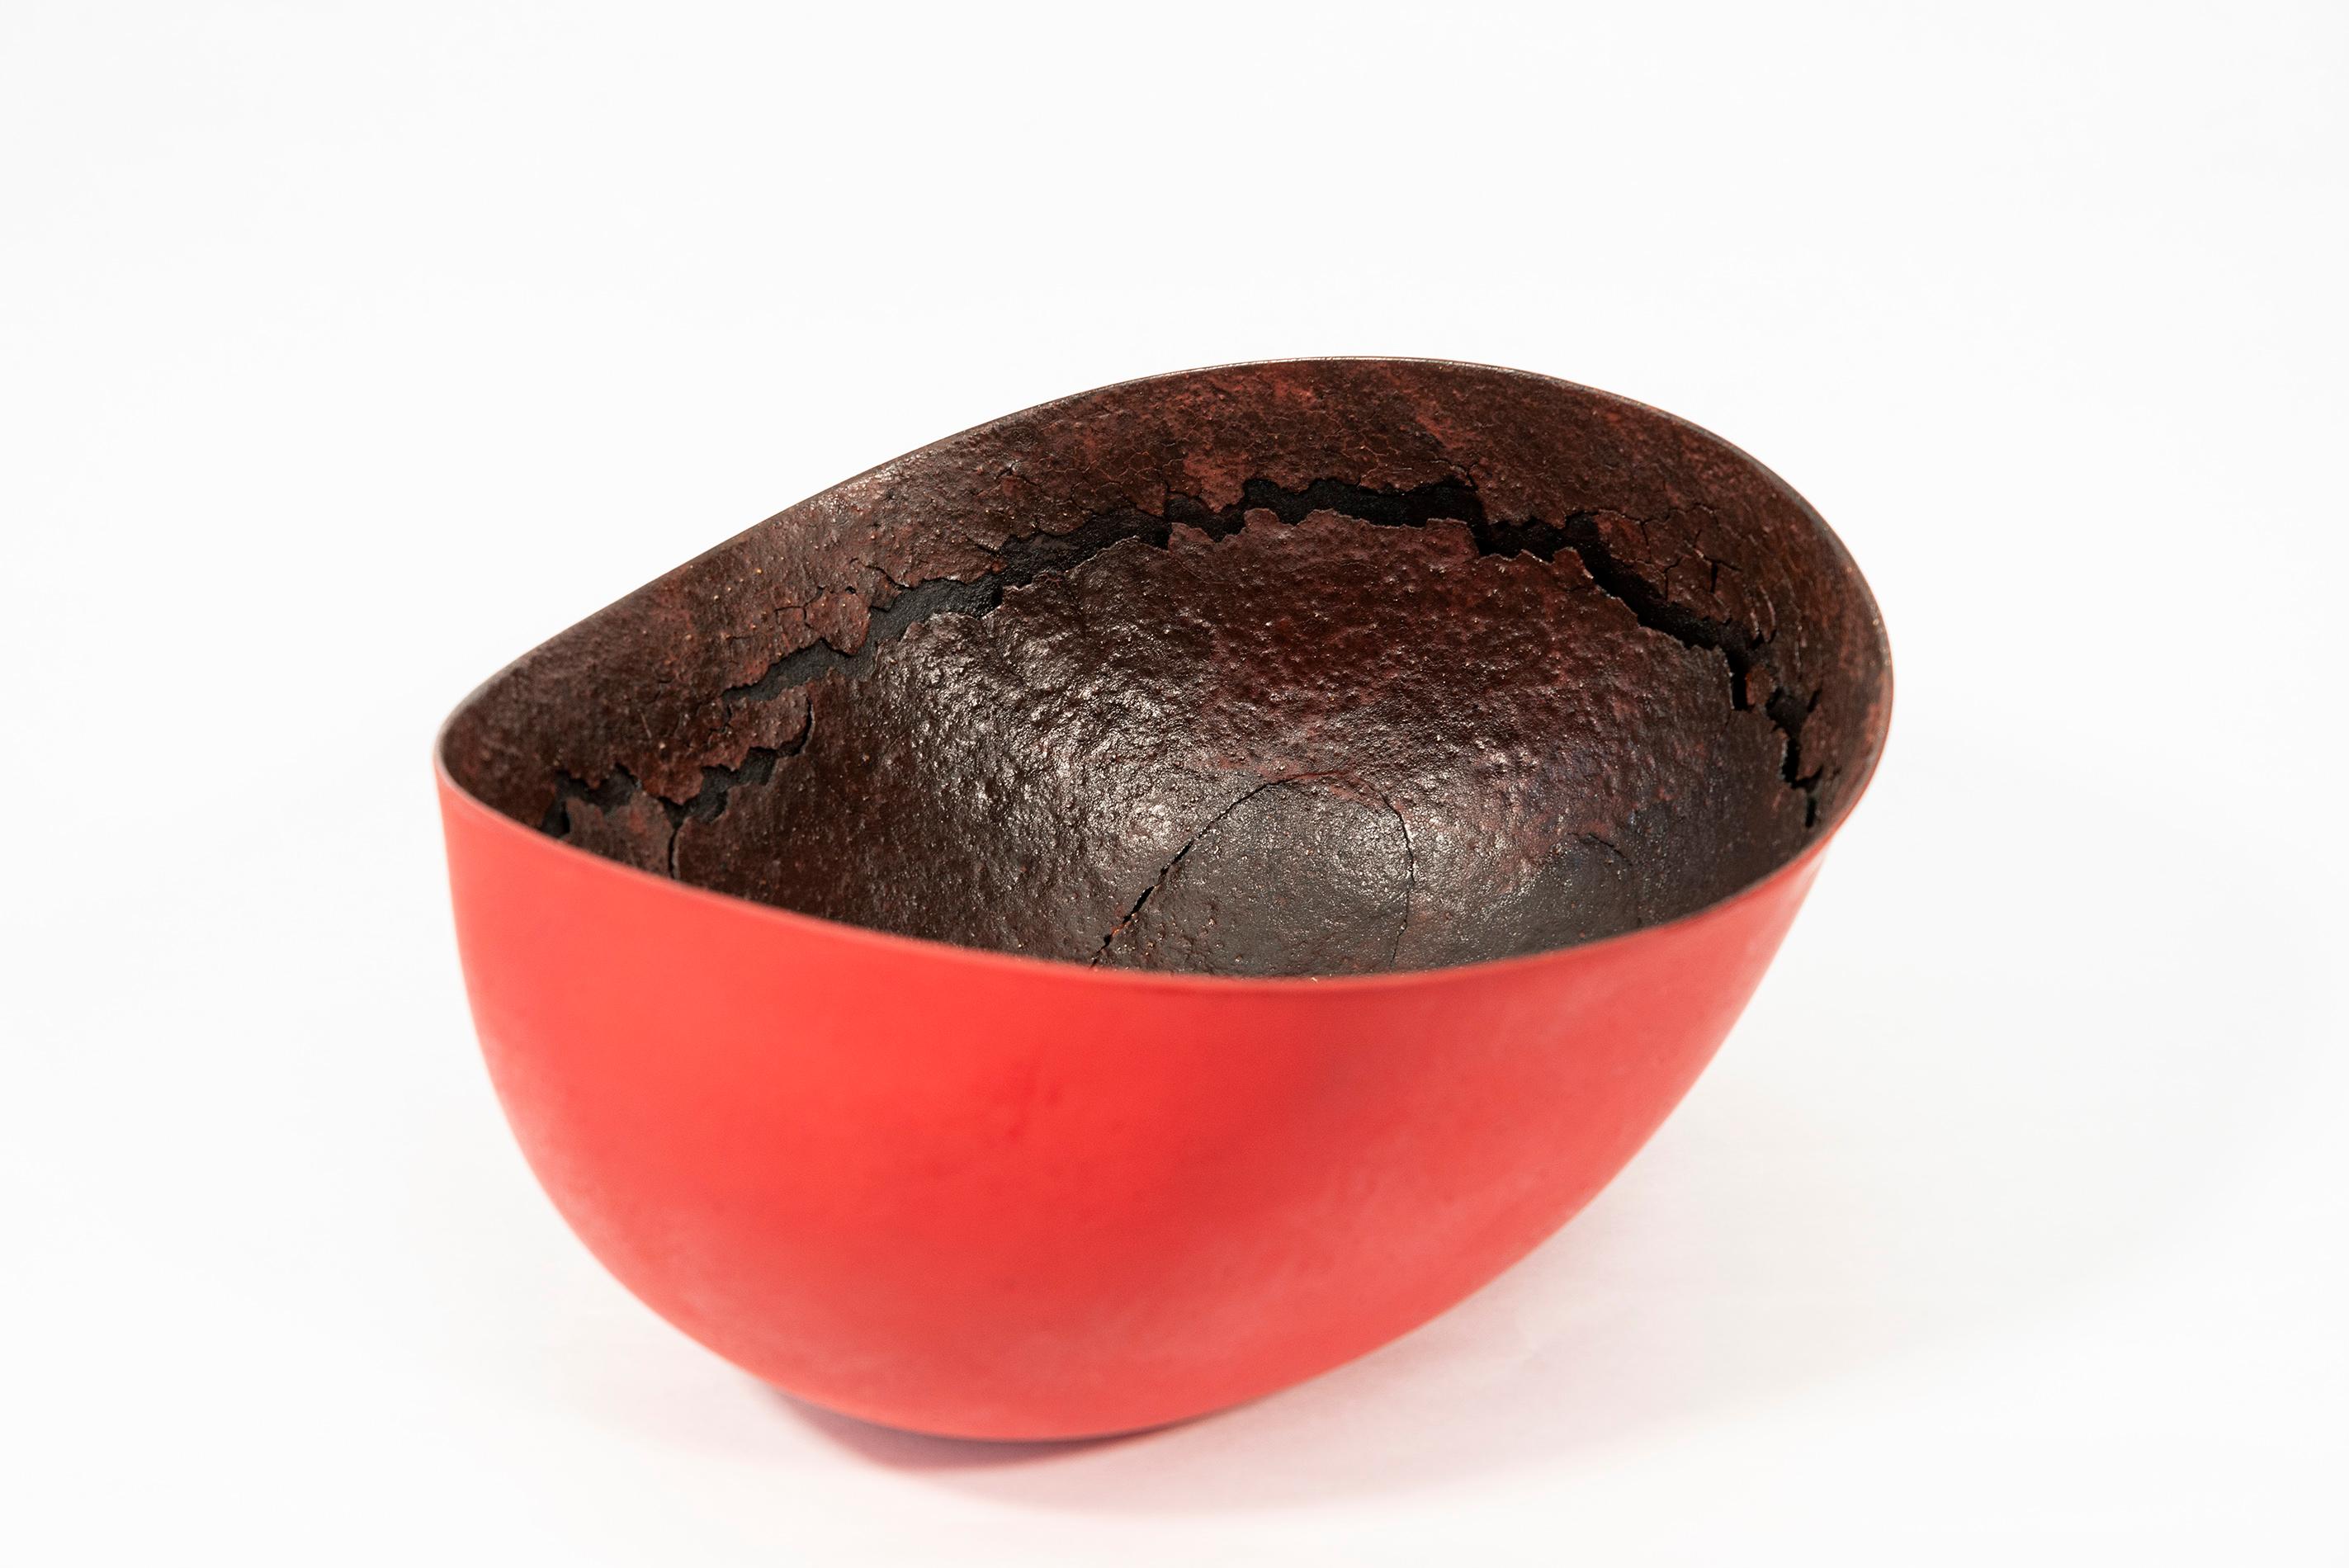 Master ceramicist Steven Heinemann continues his exploration of the potential of the vessel, an ancient form, with this series of untitled pieces. The organic oval shape is inspired by nature. The bright red exterior offers a vivid contrast to the